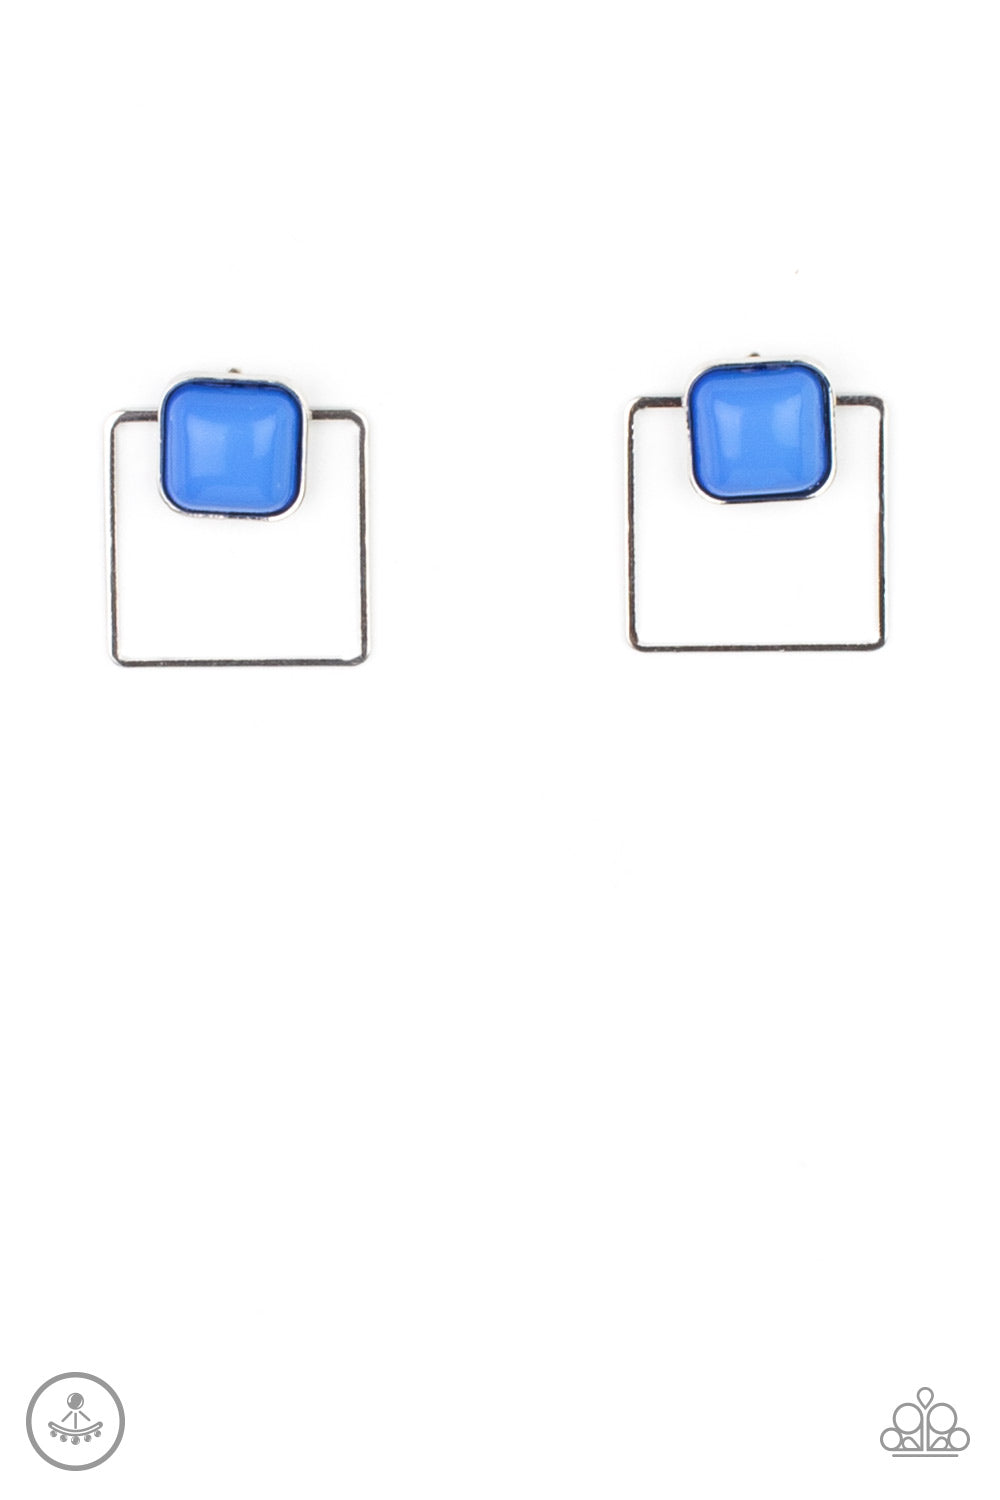 FLAIR and Square Blue Jacket Earring - Paparazzi Accessories  A bubbly French Blue square bead attaches to a double-sided post, while an airy silver square frame peeks out beneath the ear for a bold look. Earring attaches to a standard post fitting.  All Paparazzi Accessories are lead free and nickel free!  Sold as one pair of post earrings.